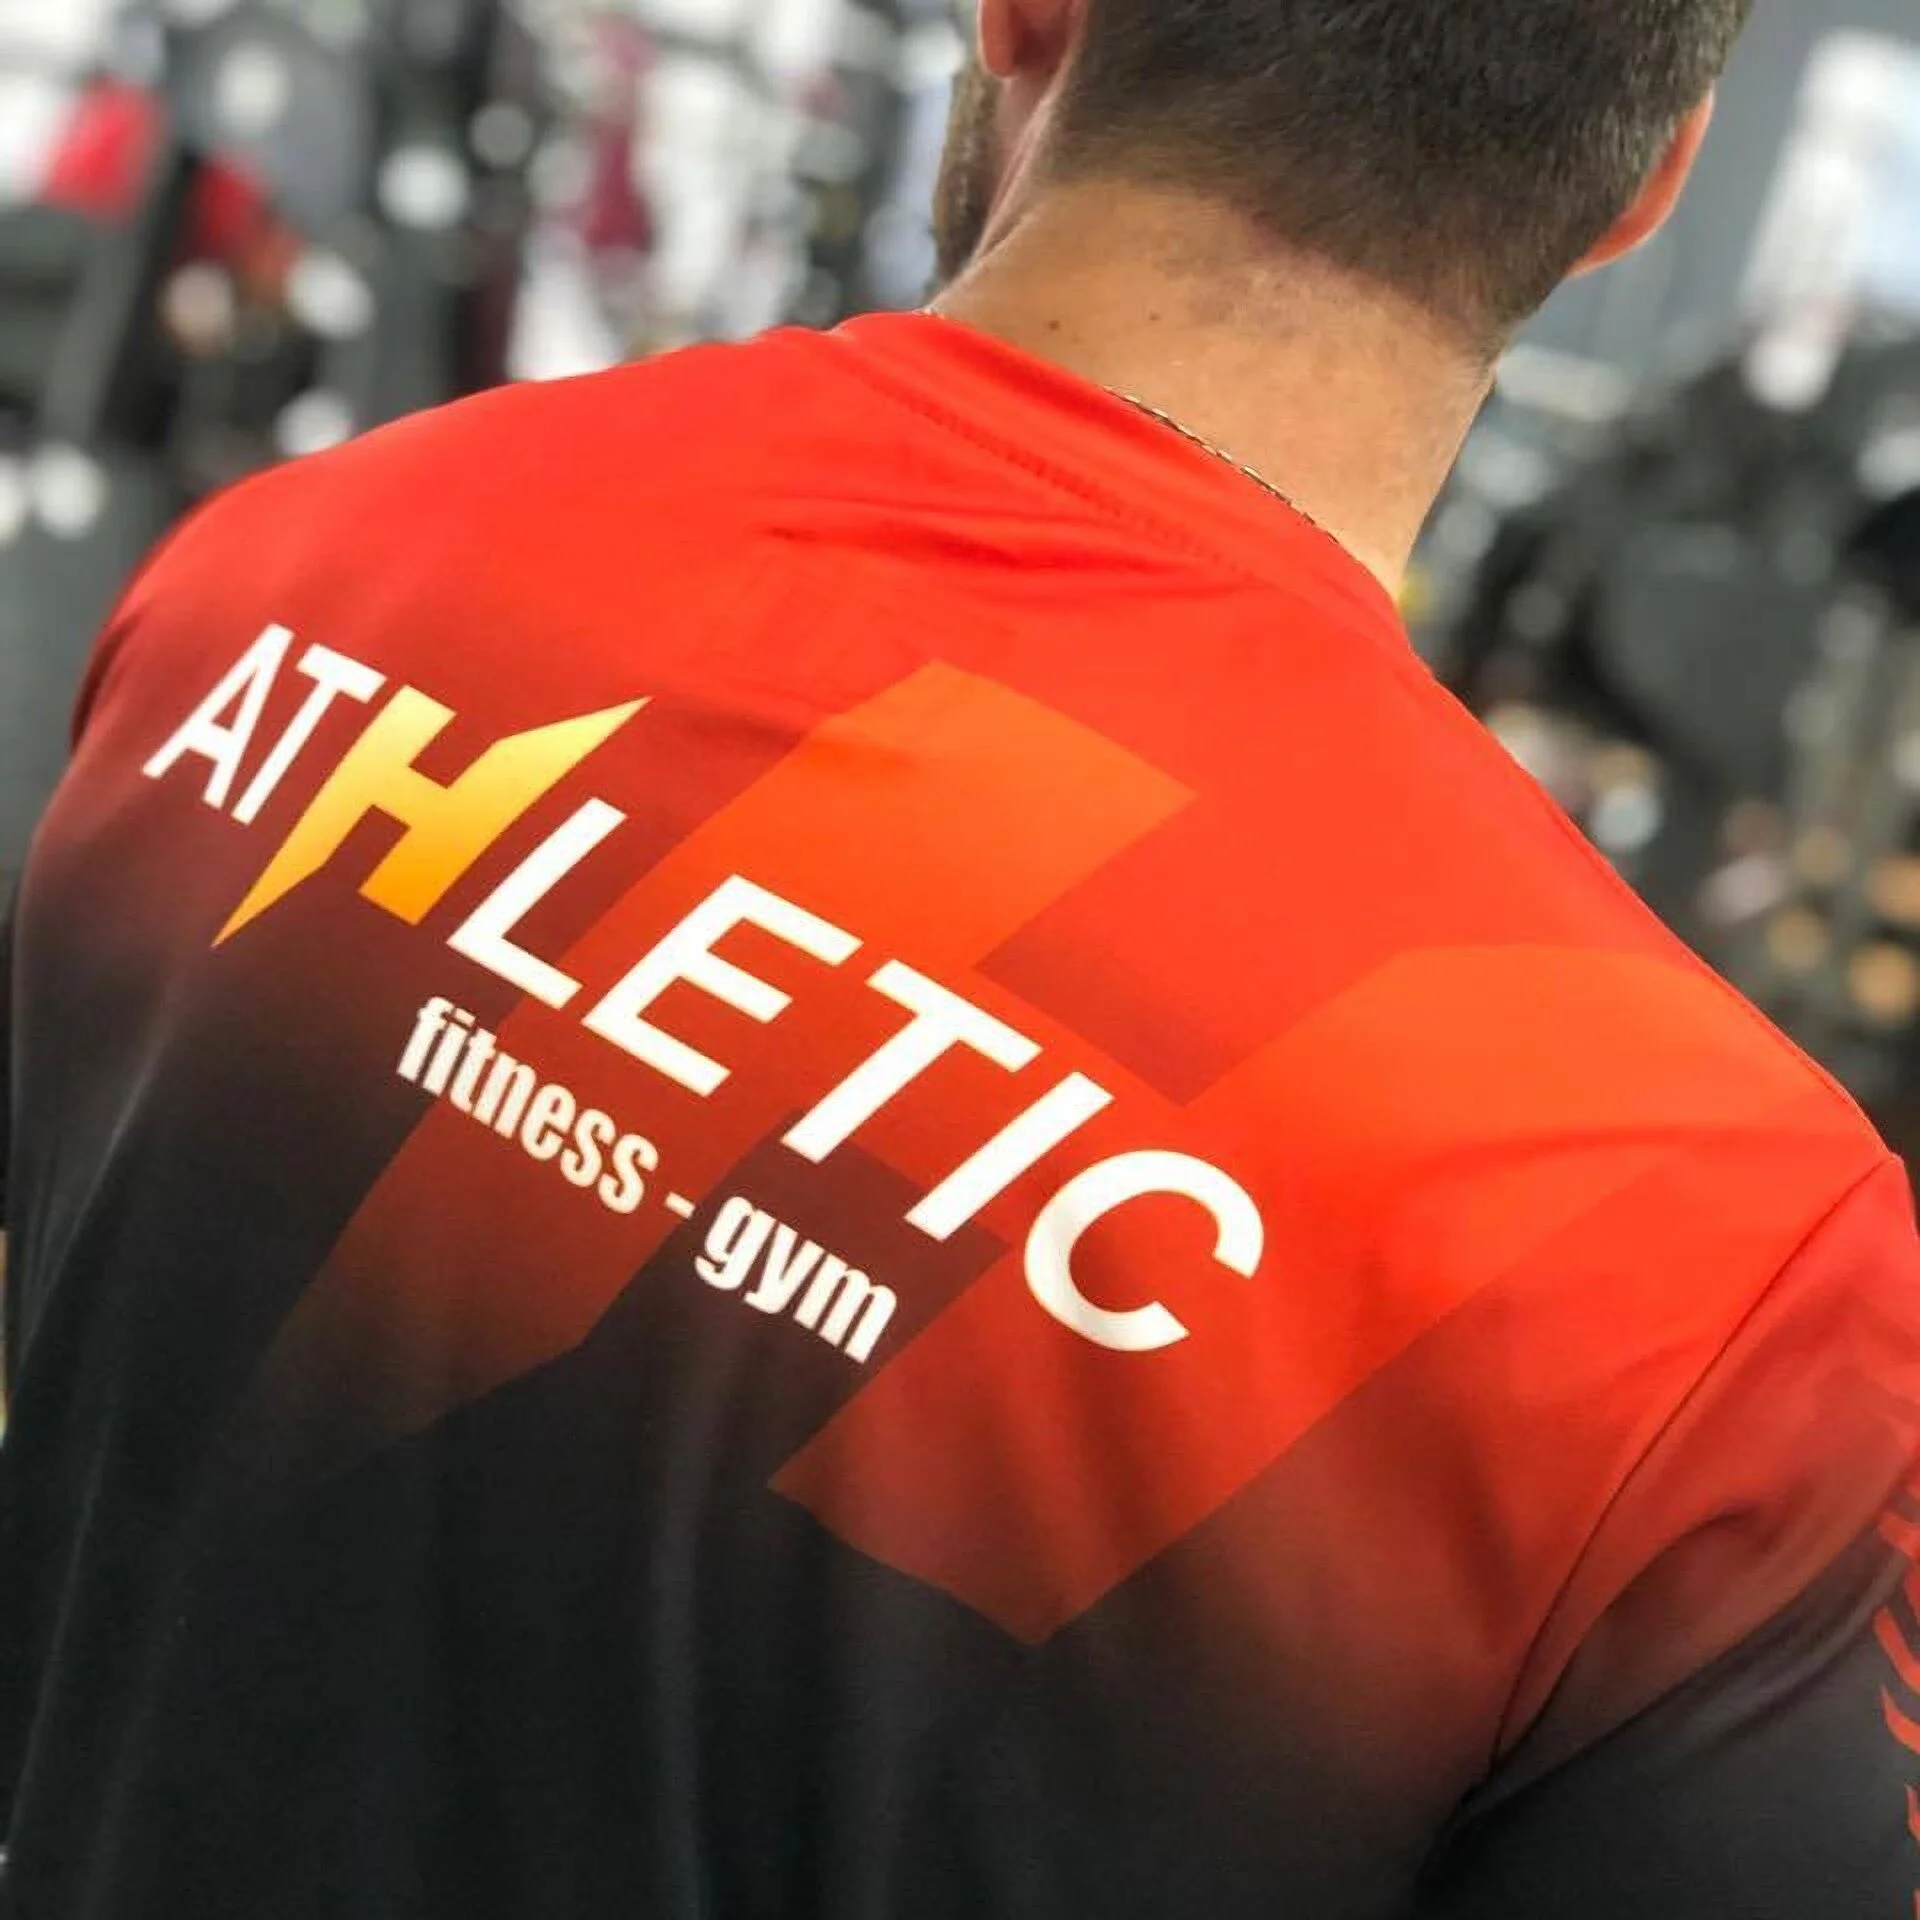 Atletic Fitness Gym-855